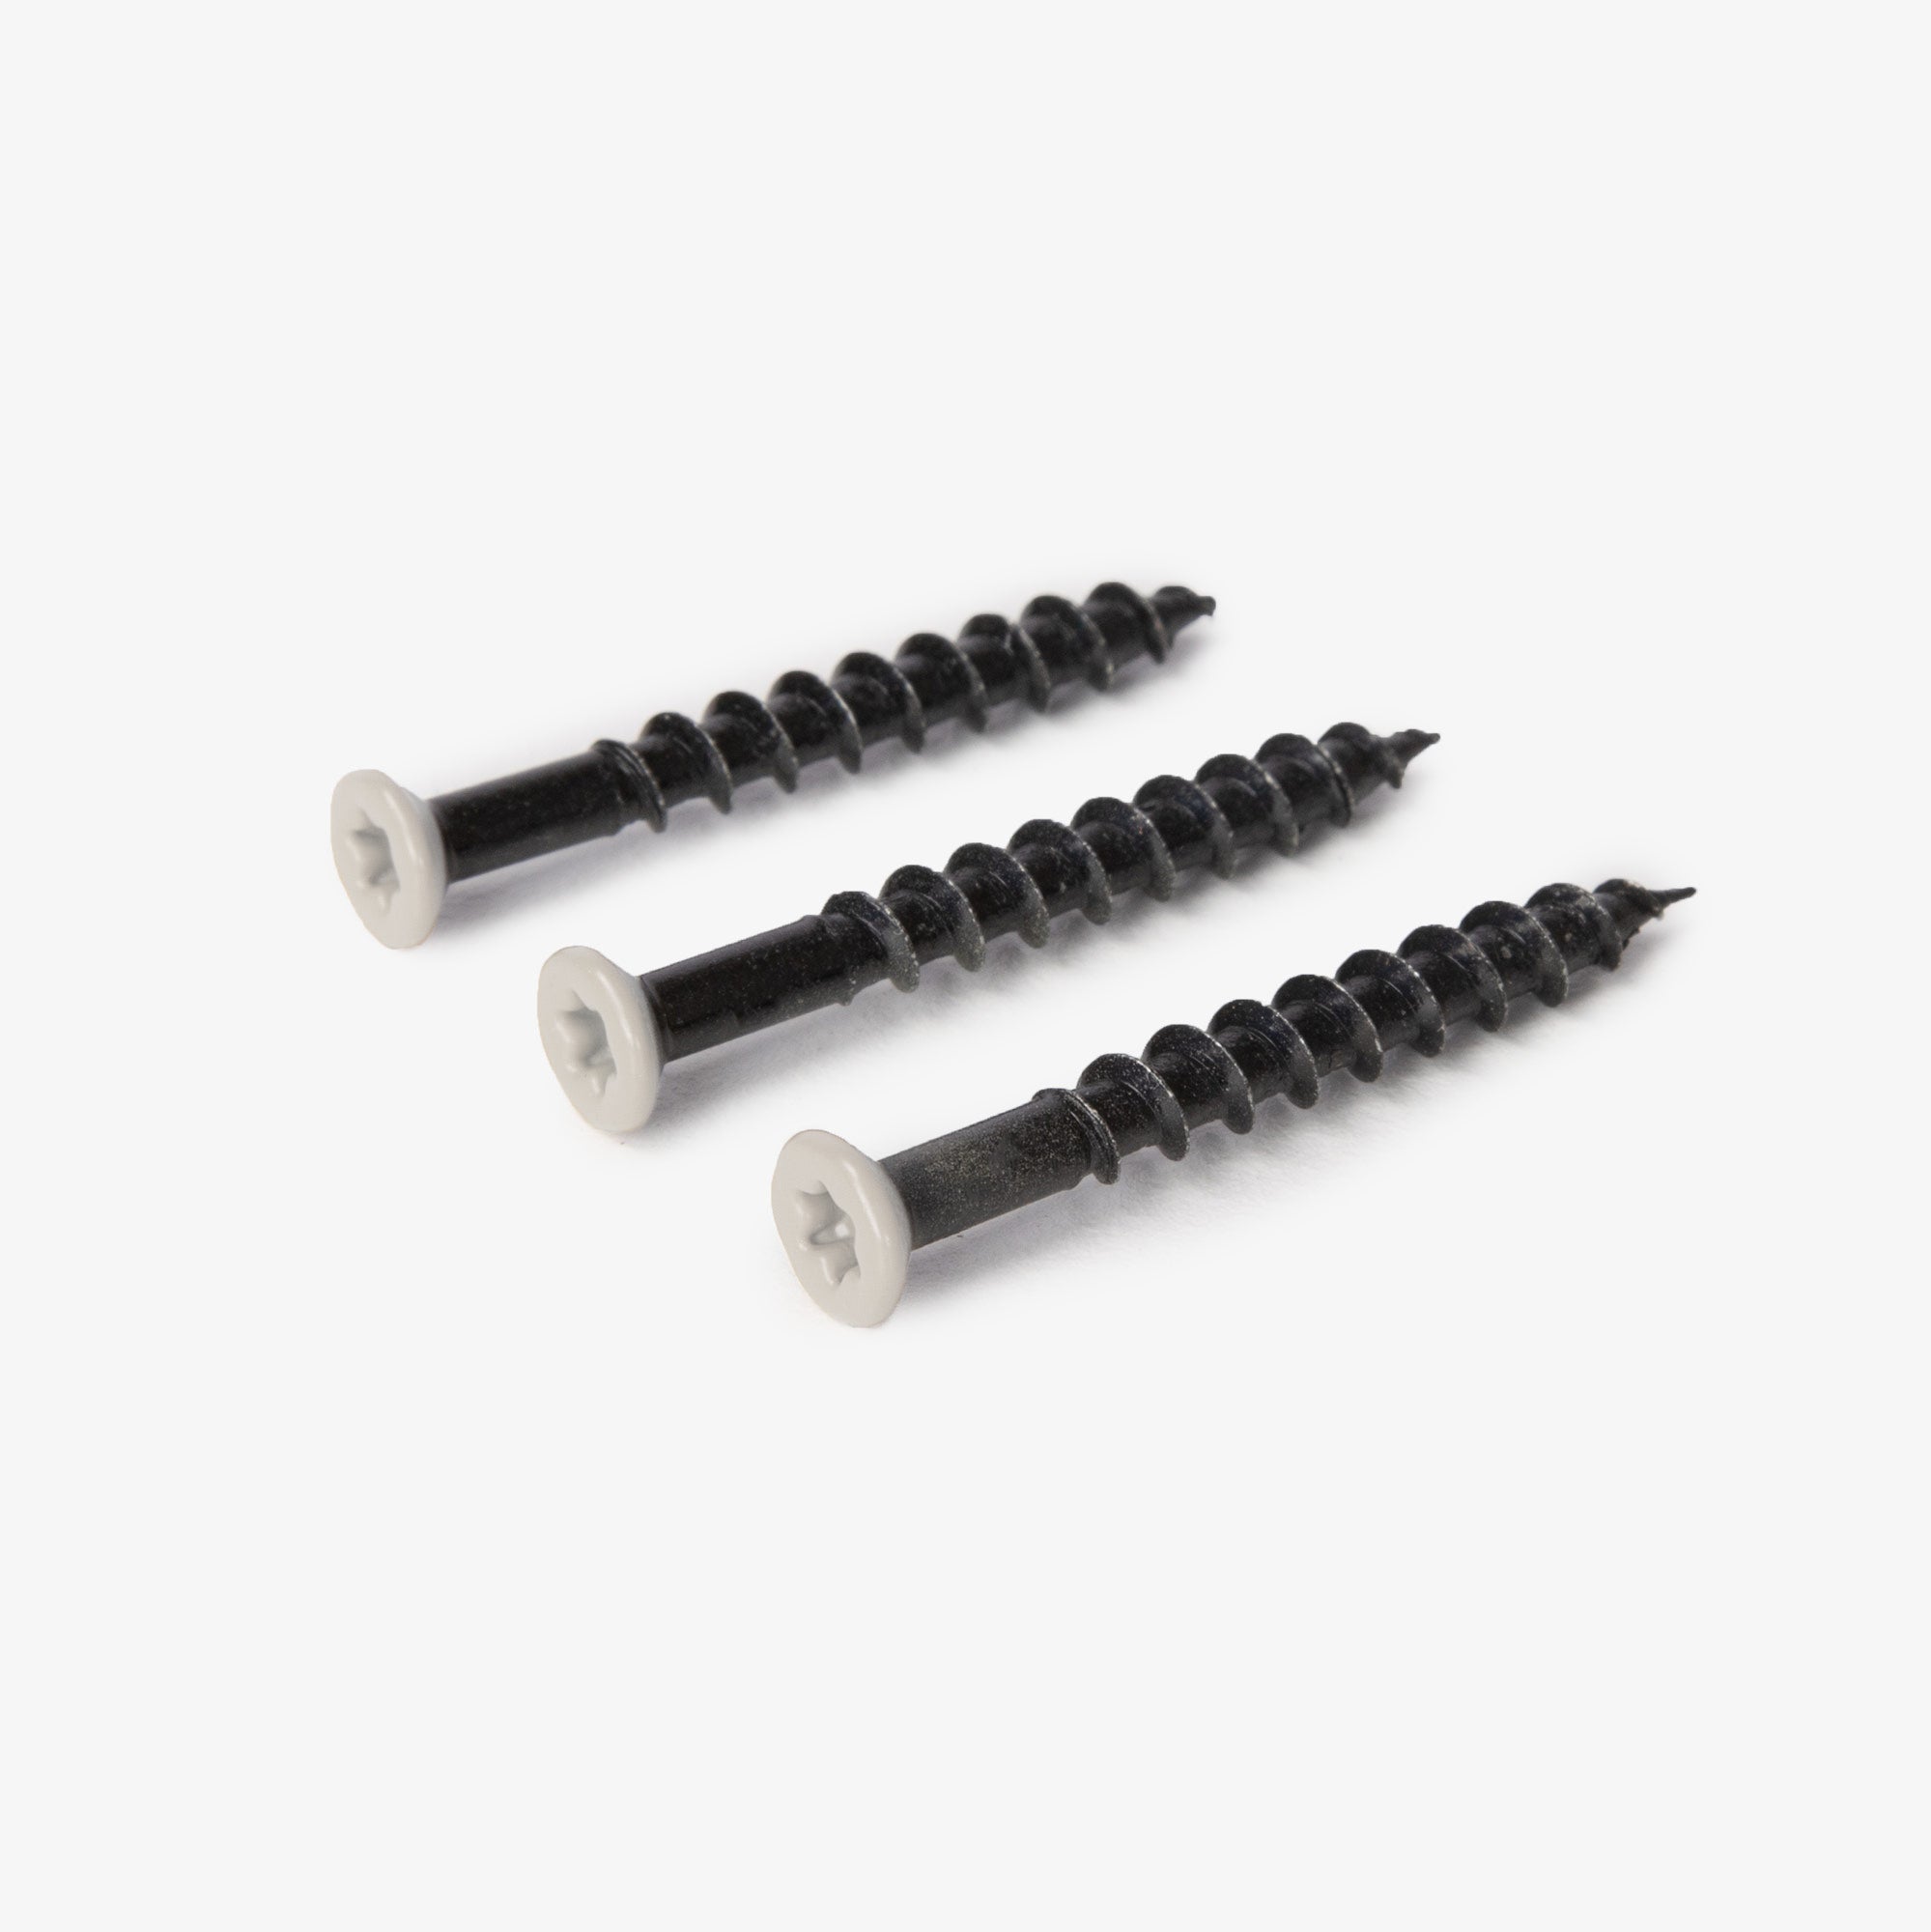 Coloured Screws - 100 Pack / Silver Birch/Marble